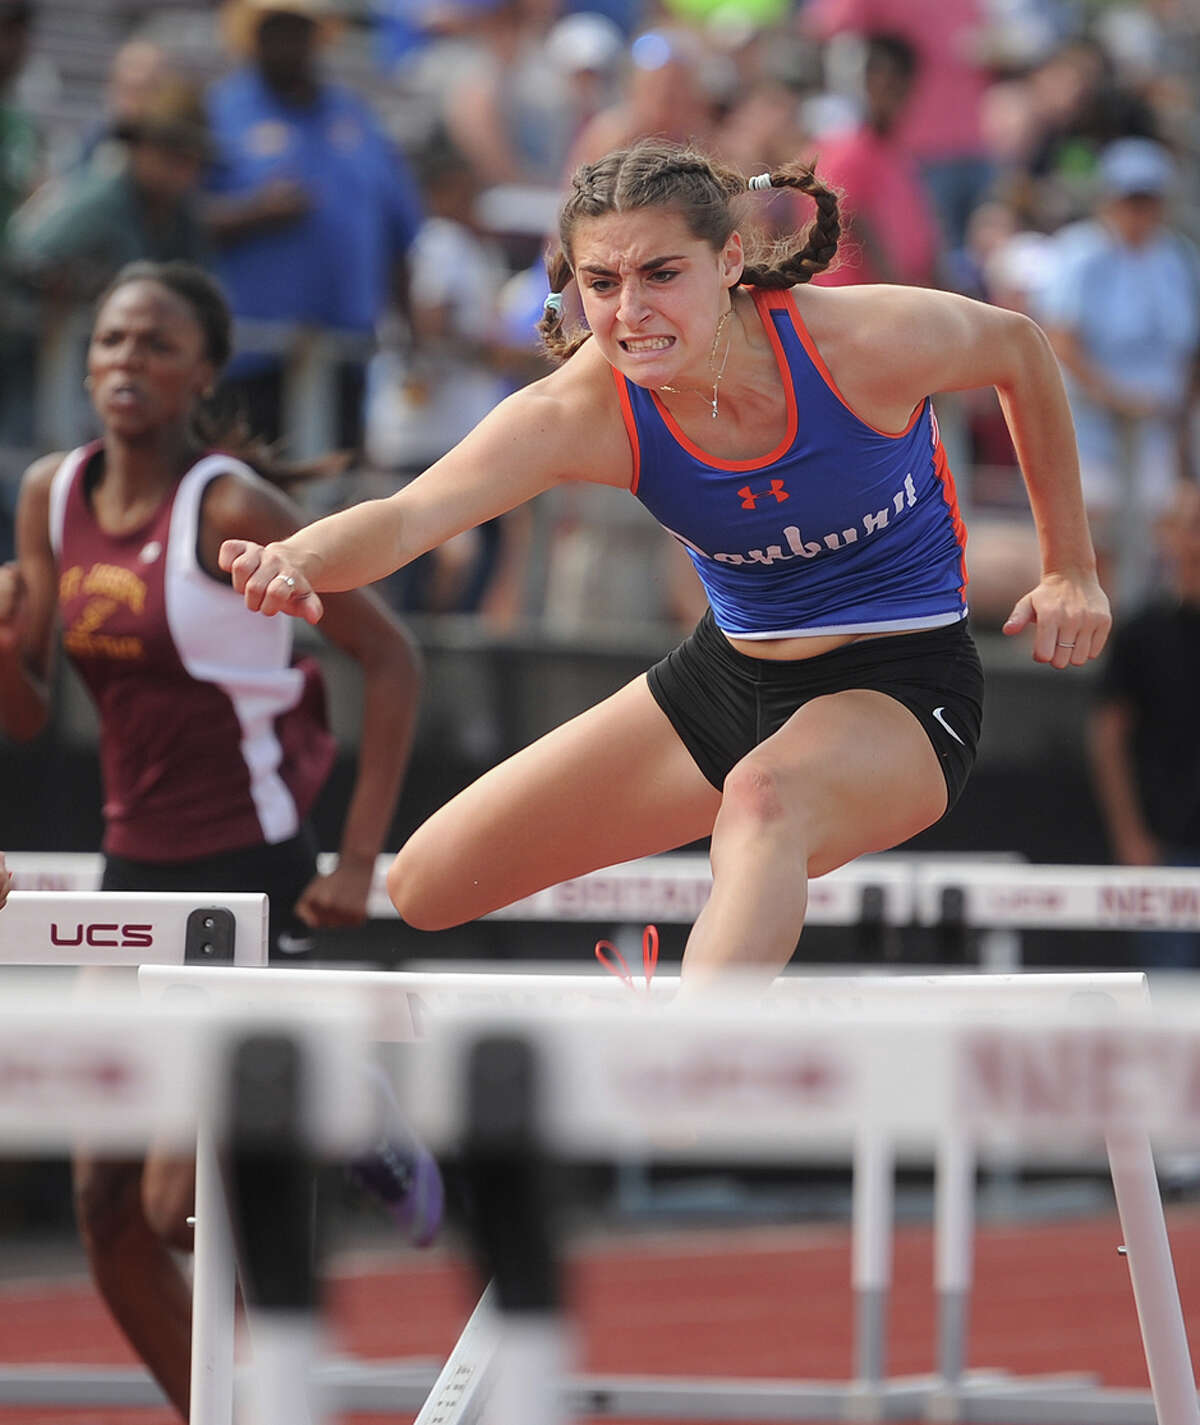 FILE PHOTO: Danbury High School's Bridget Chiaravalle, right, races to a second place finish in the 100 meter hurdles at the State Open track championships at New Britain Stadium in New Britain, Conn. on Monday, June 6, 2016.